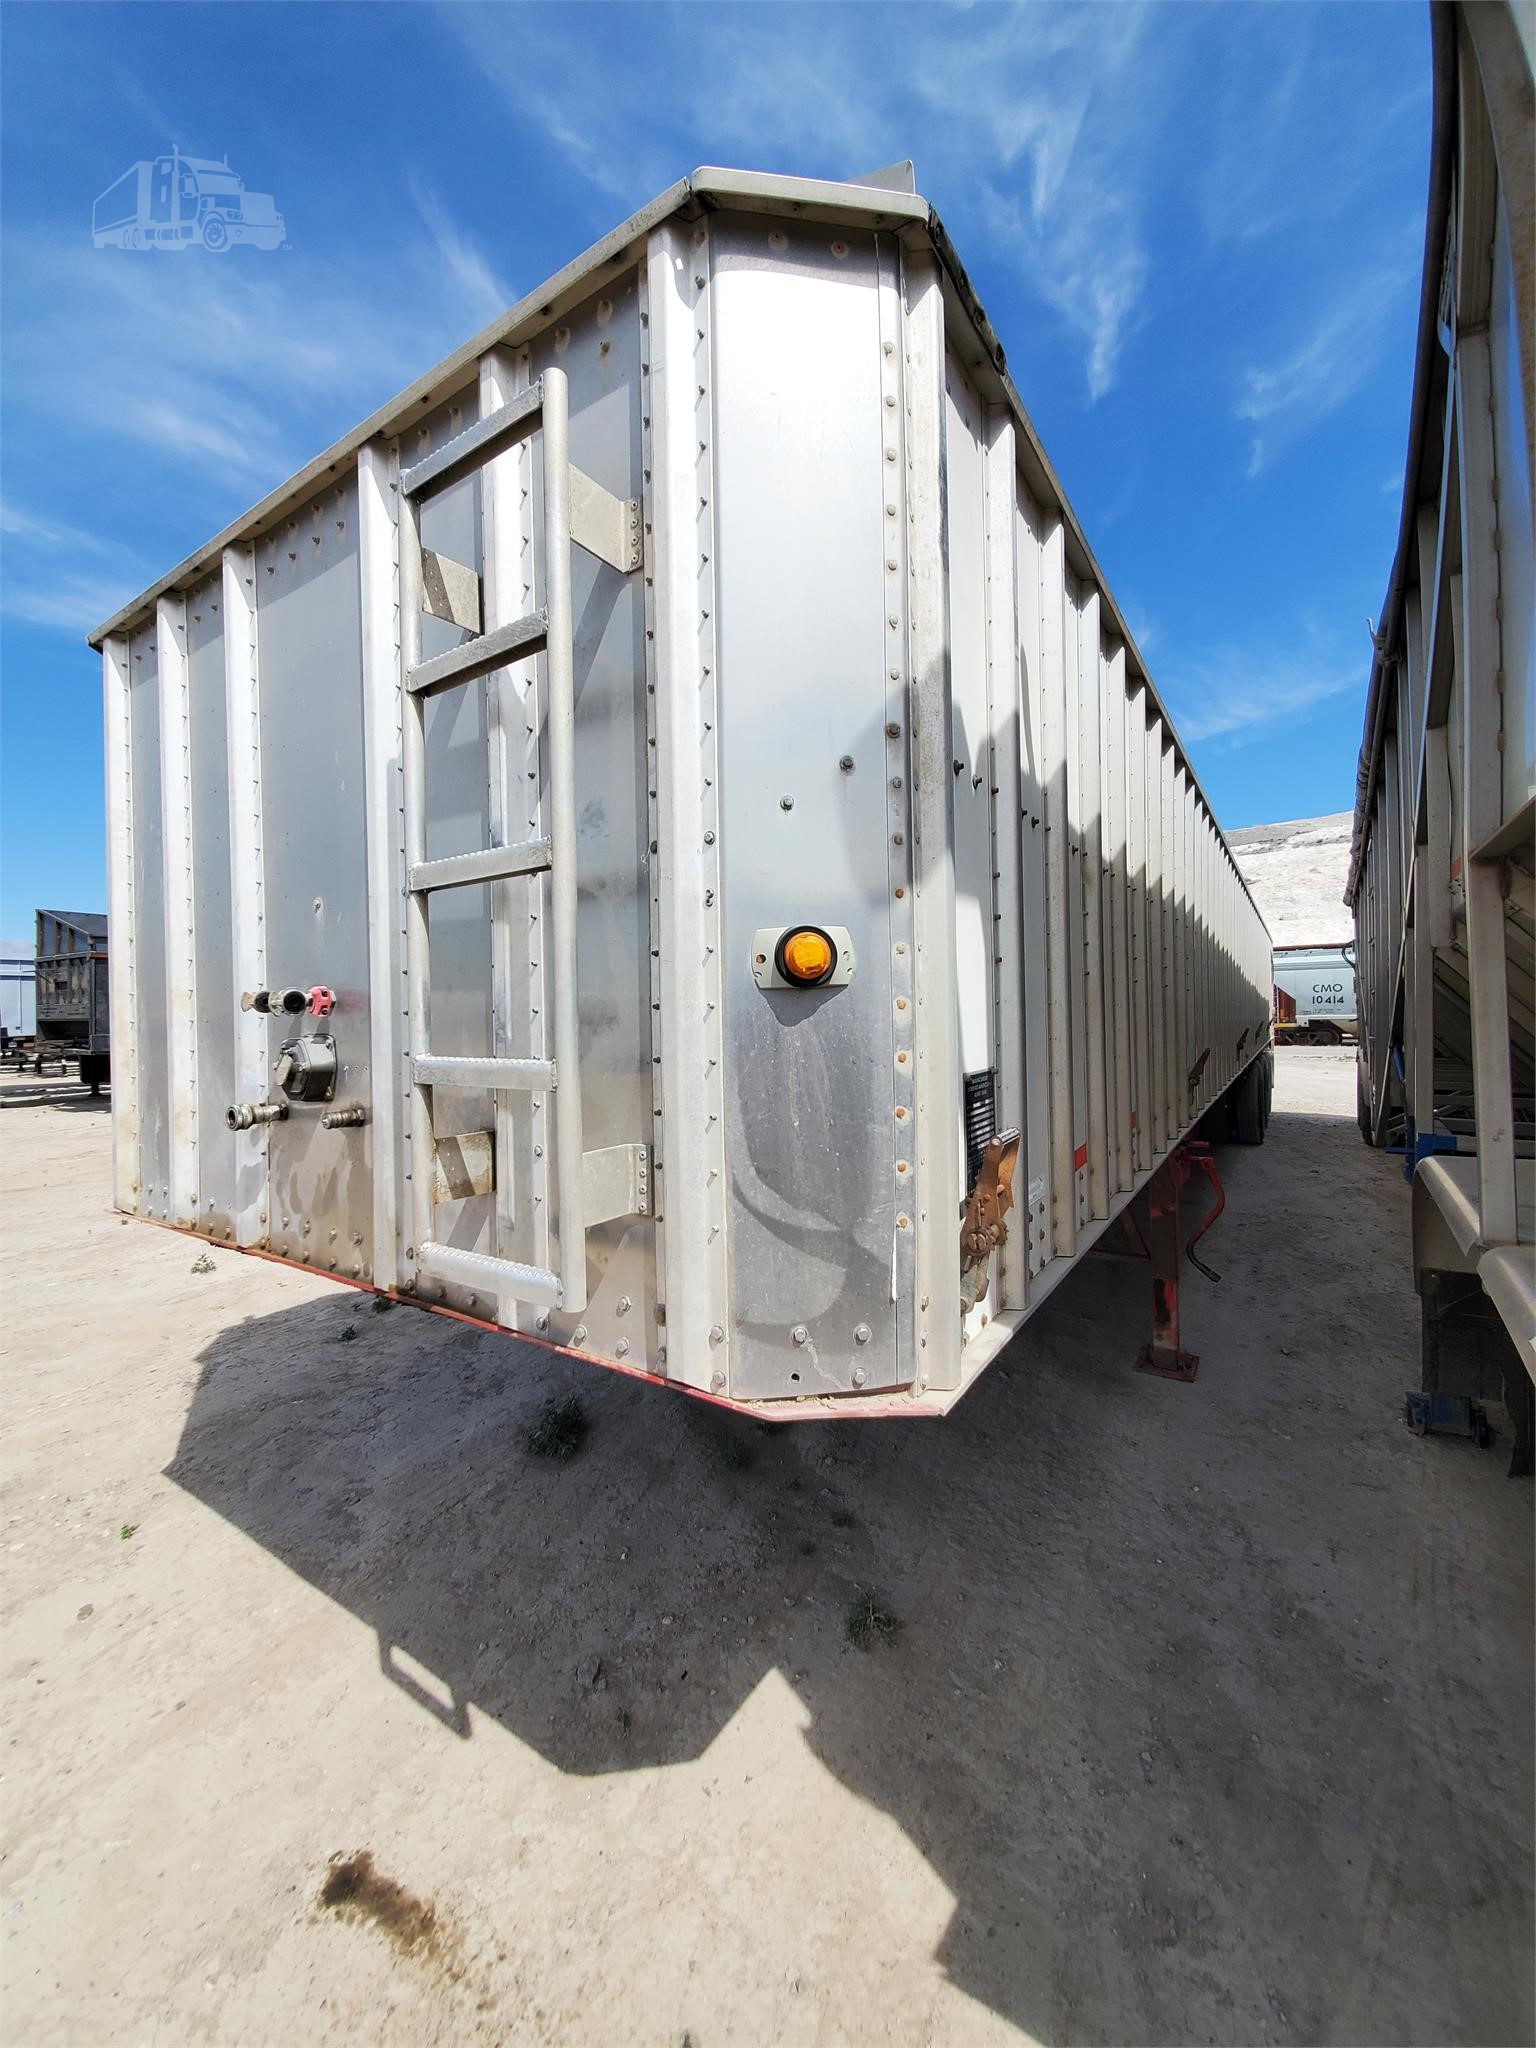 Used Trailers For Sale By Btr Sales 12 Listings Www Barclaytruck Com Page 1 Of 1